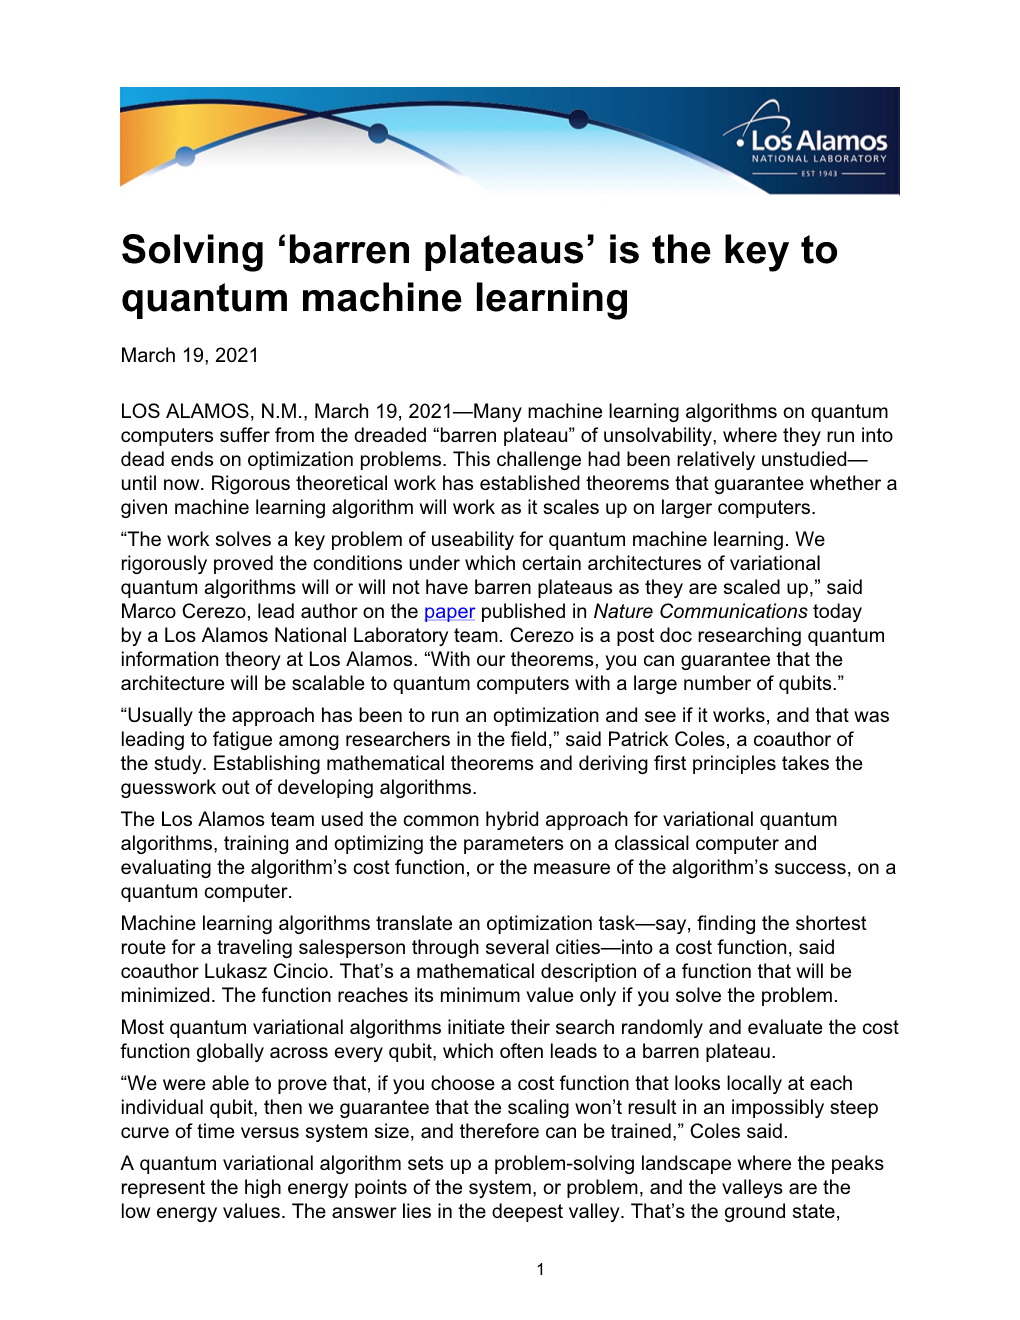 Barren Plateaus’ Is the Key to Quantum Machine Learning